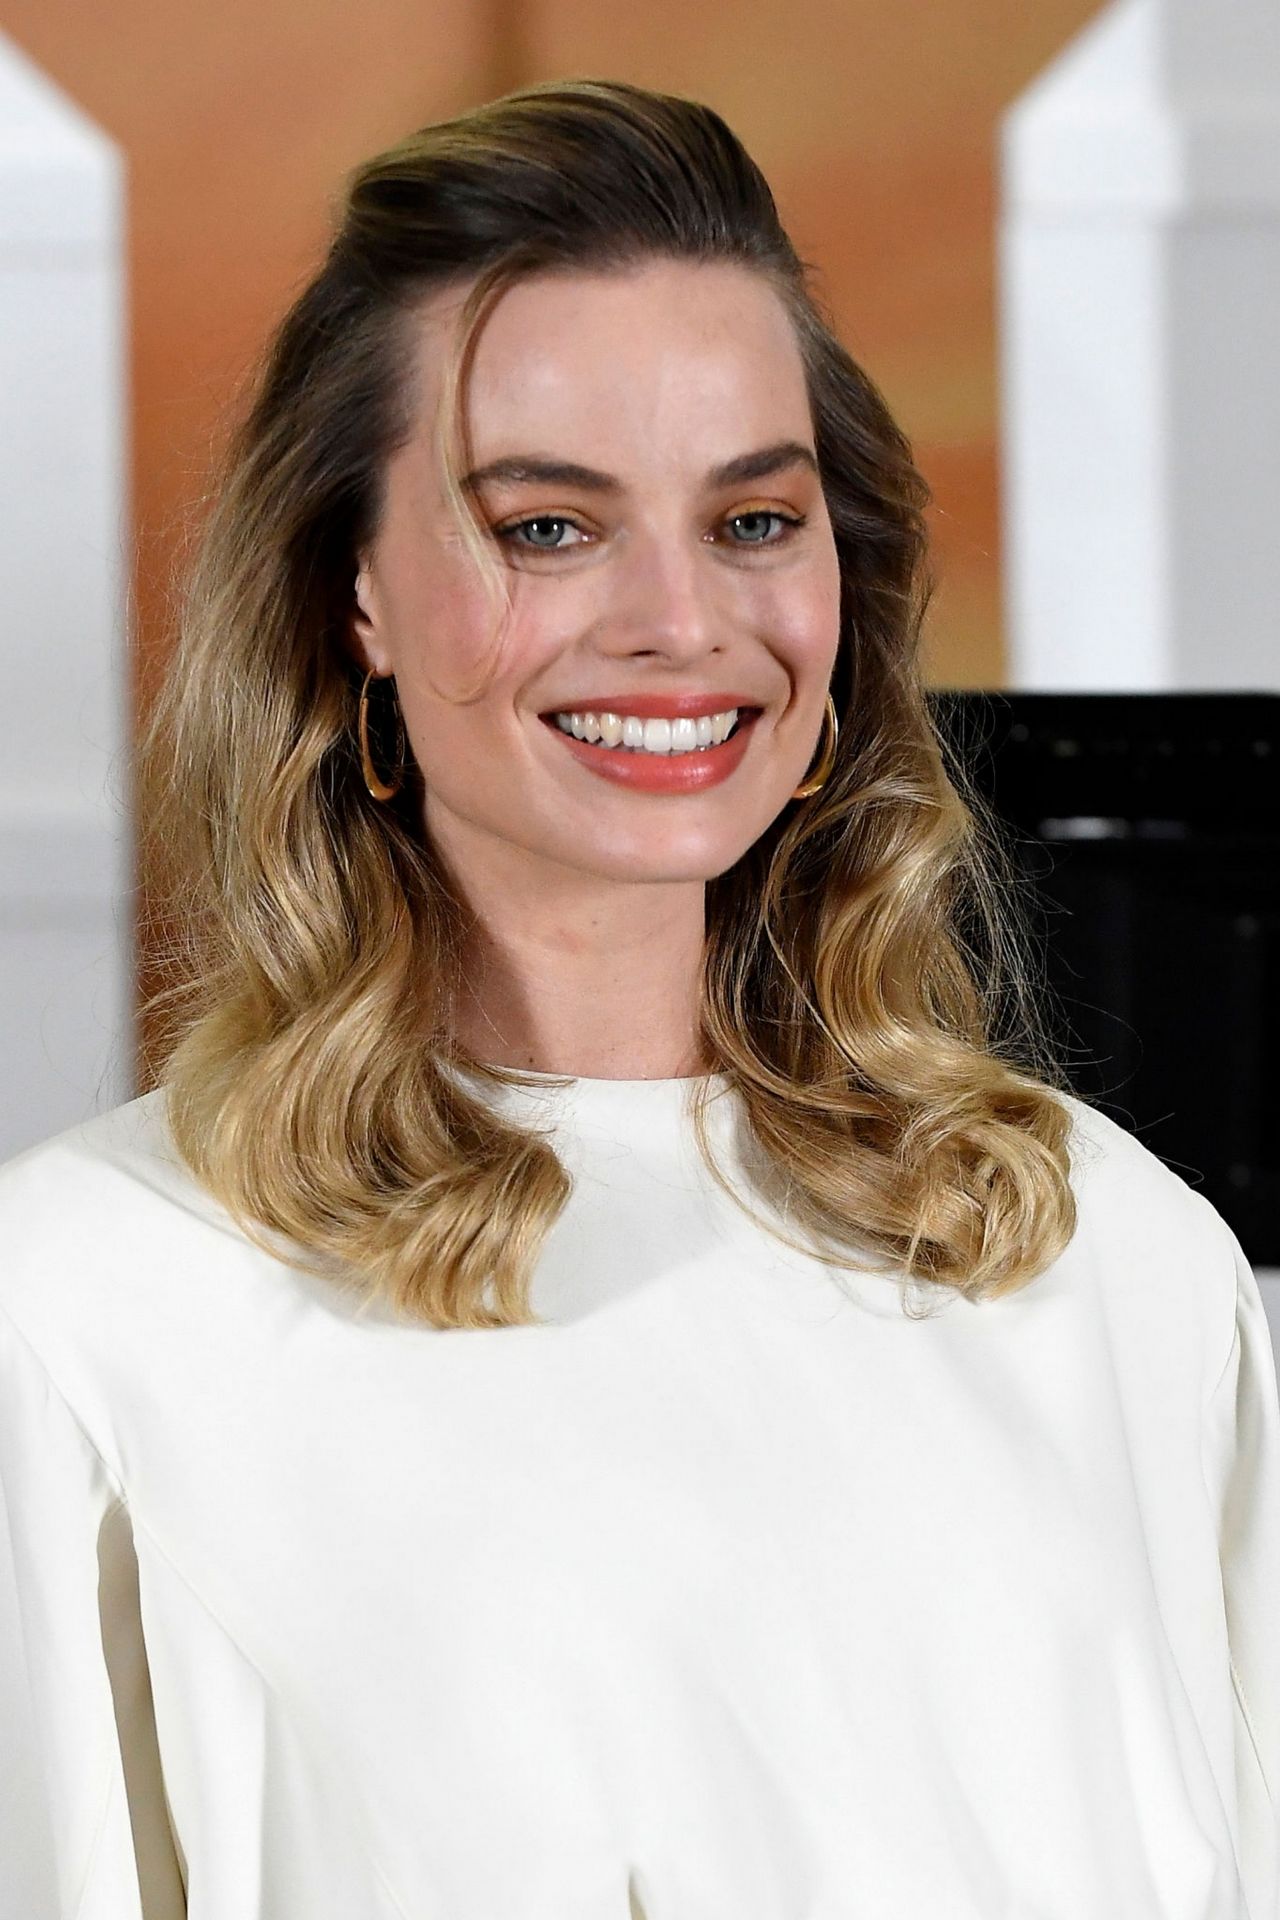 https://celebmafia.com/wp-content/uploads/2019/07/margot-robbie-photocall-for-once-upon-a-time-in-hollywood-in-beverly-hills-14.jpg